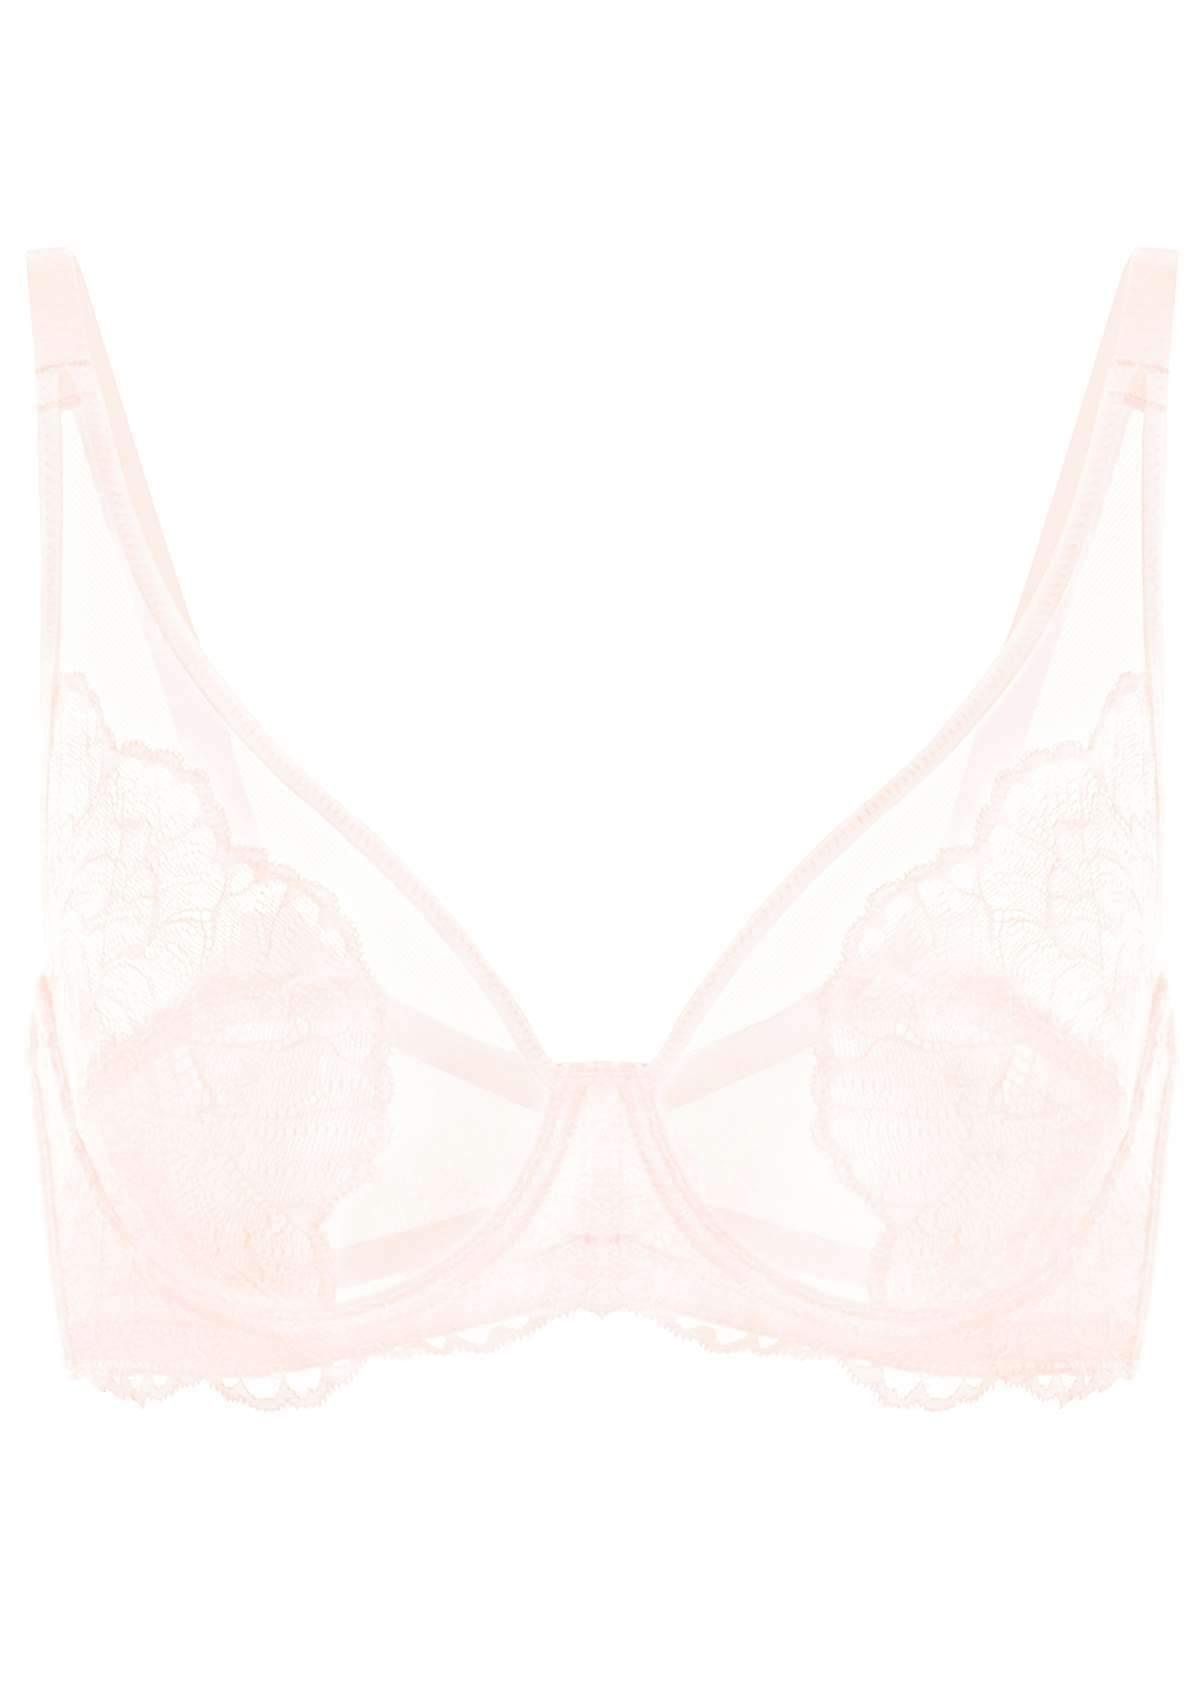 HSIA Blossom Sheer Lace Bra: Comfortable Underwire Bra For Big Busts - Dusty Peach / 42 / C